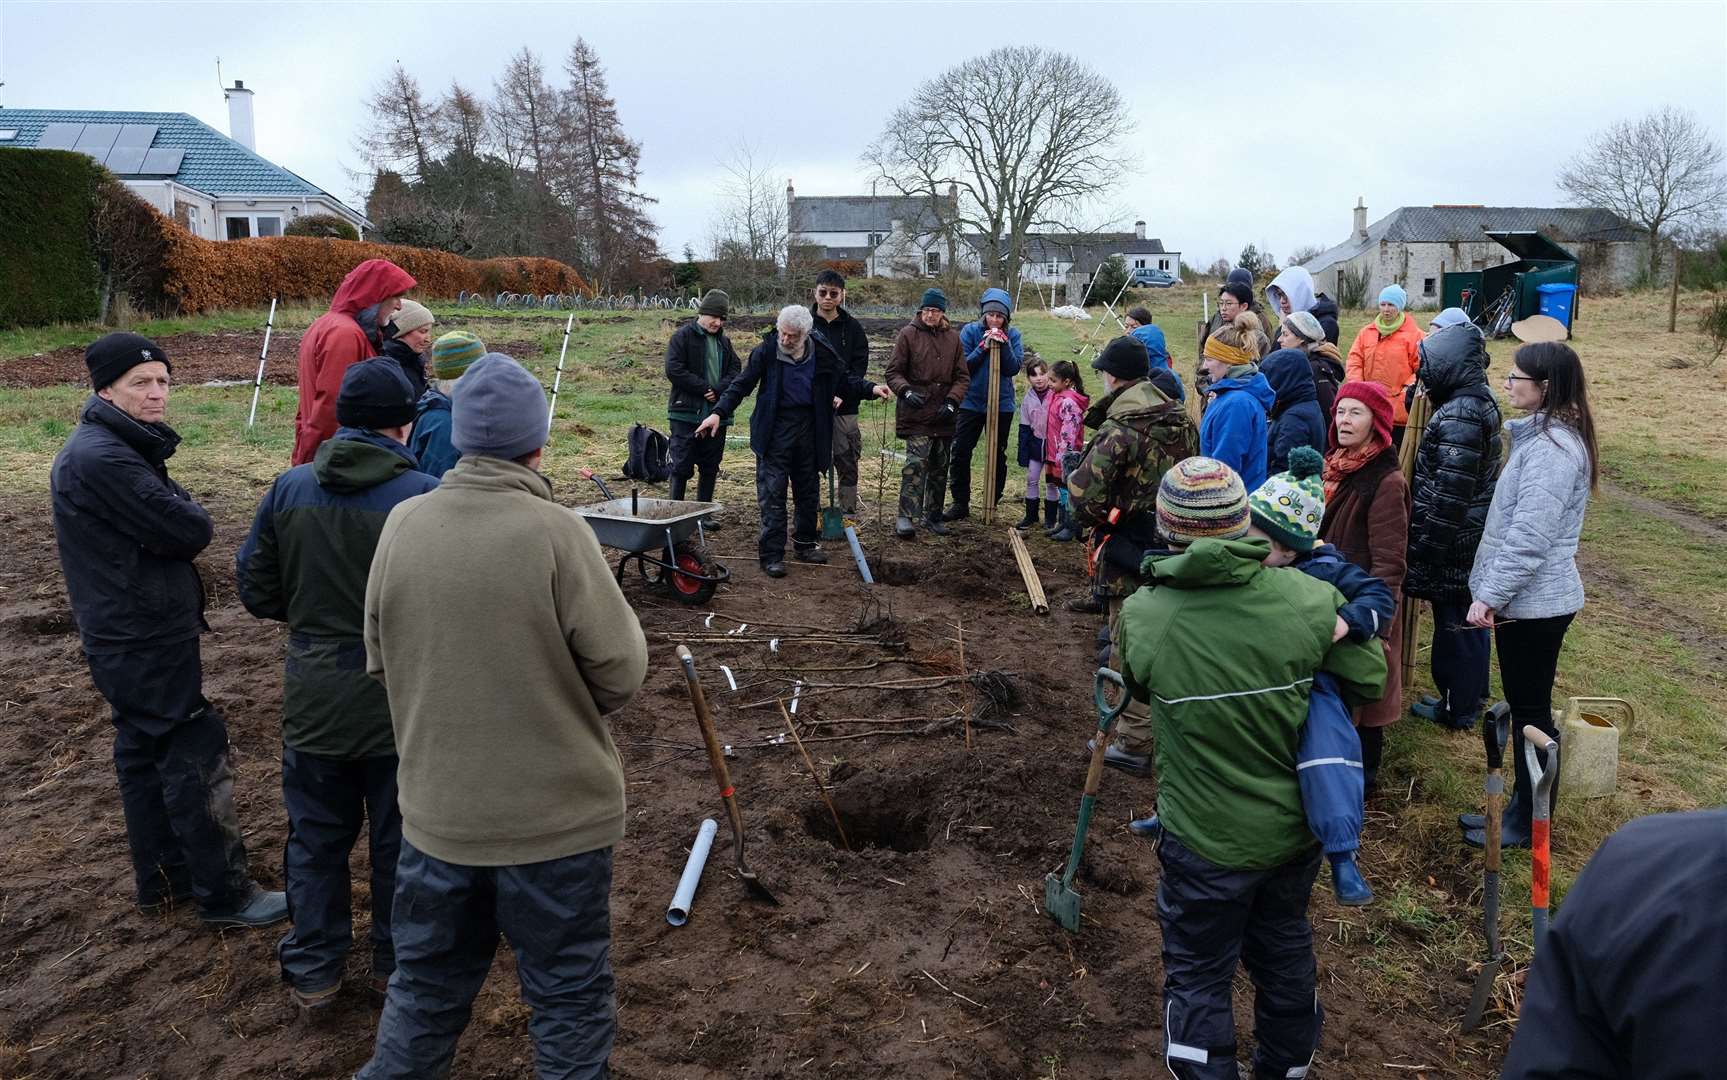 Nick Molnar of Forres Friends of Woods and Fields guided participants on the planting process.